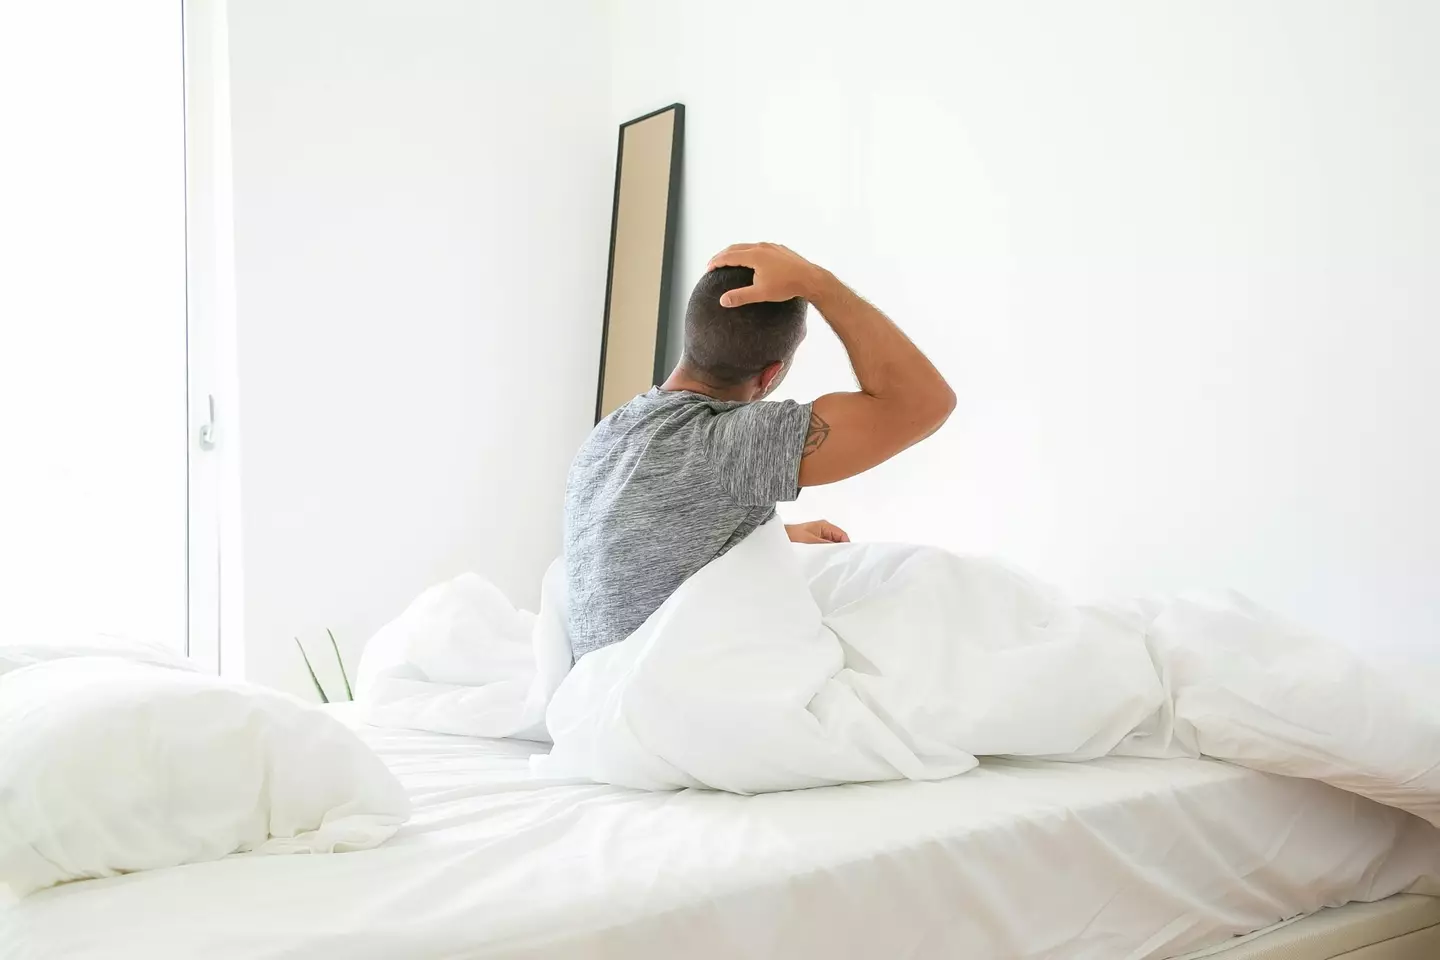 There are ways you can try to prevent sleep jerks.